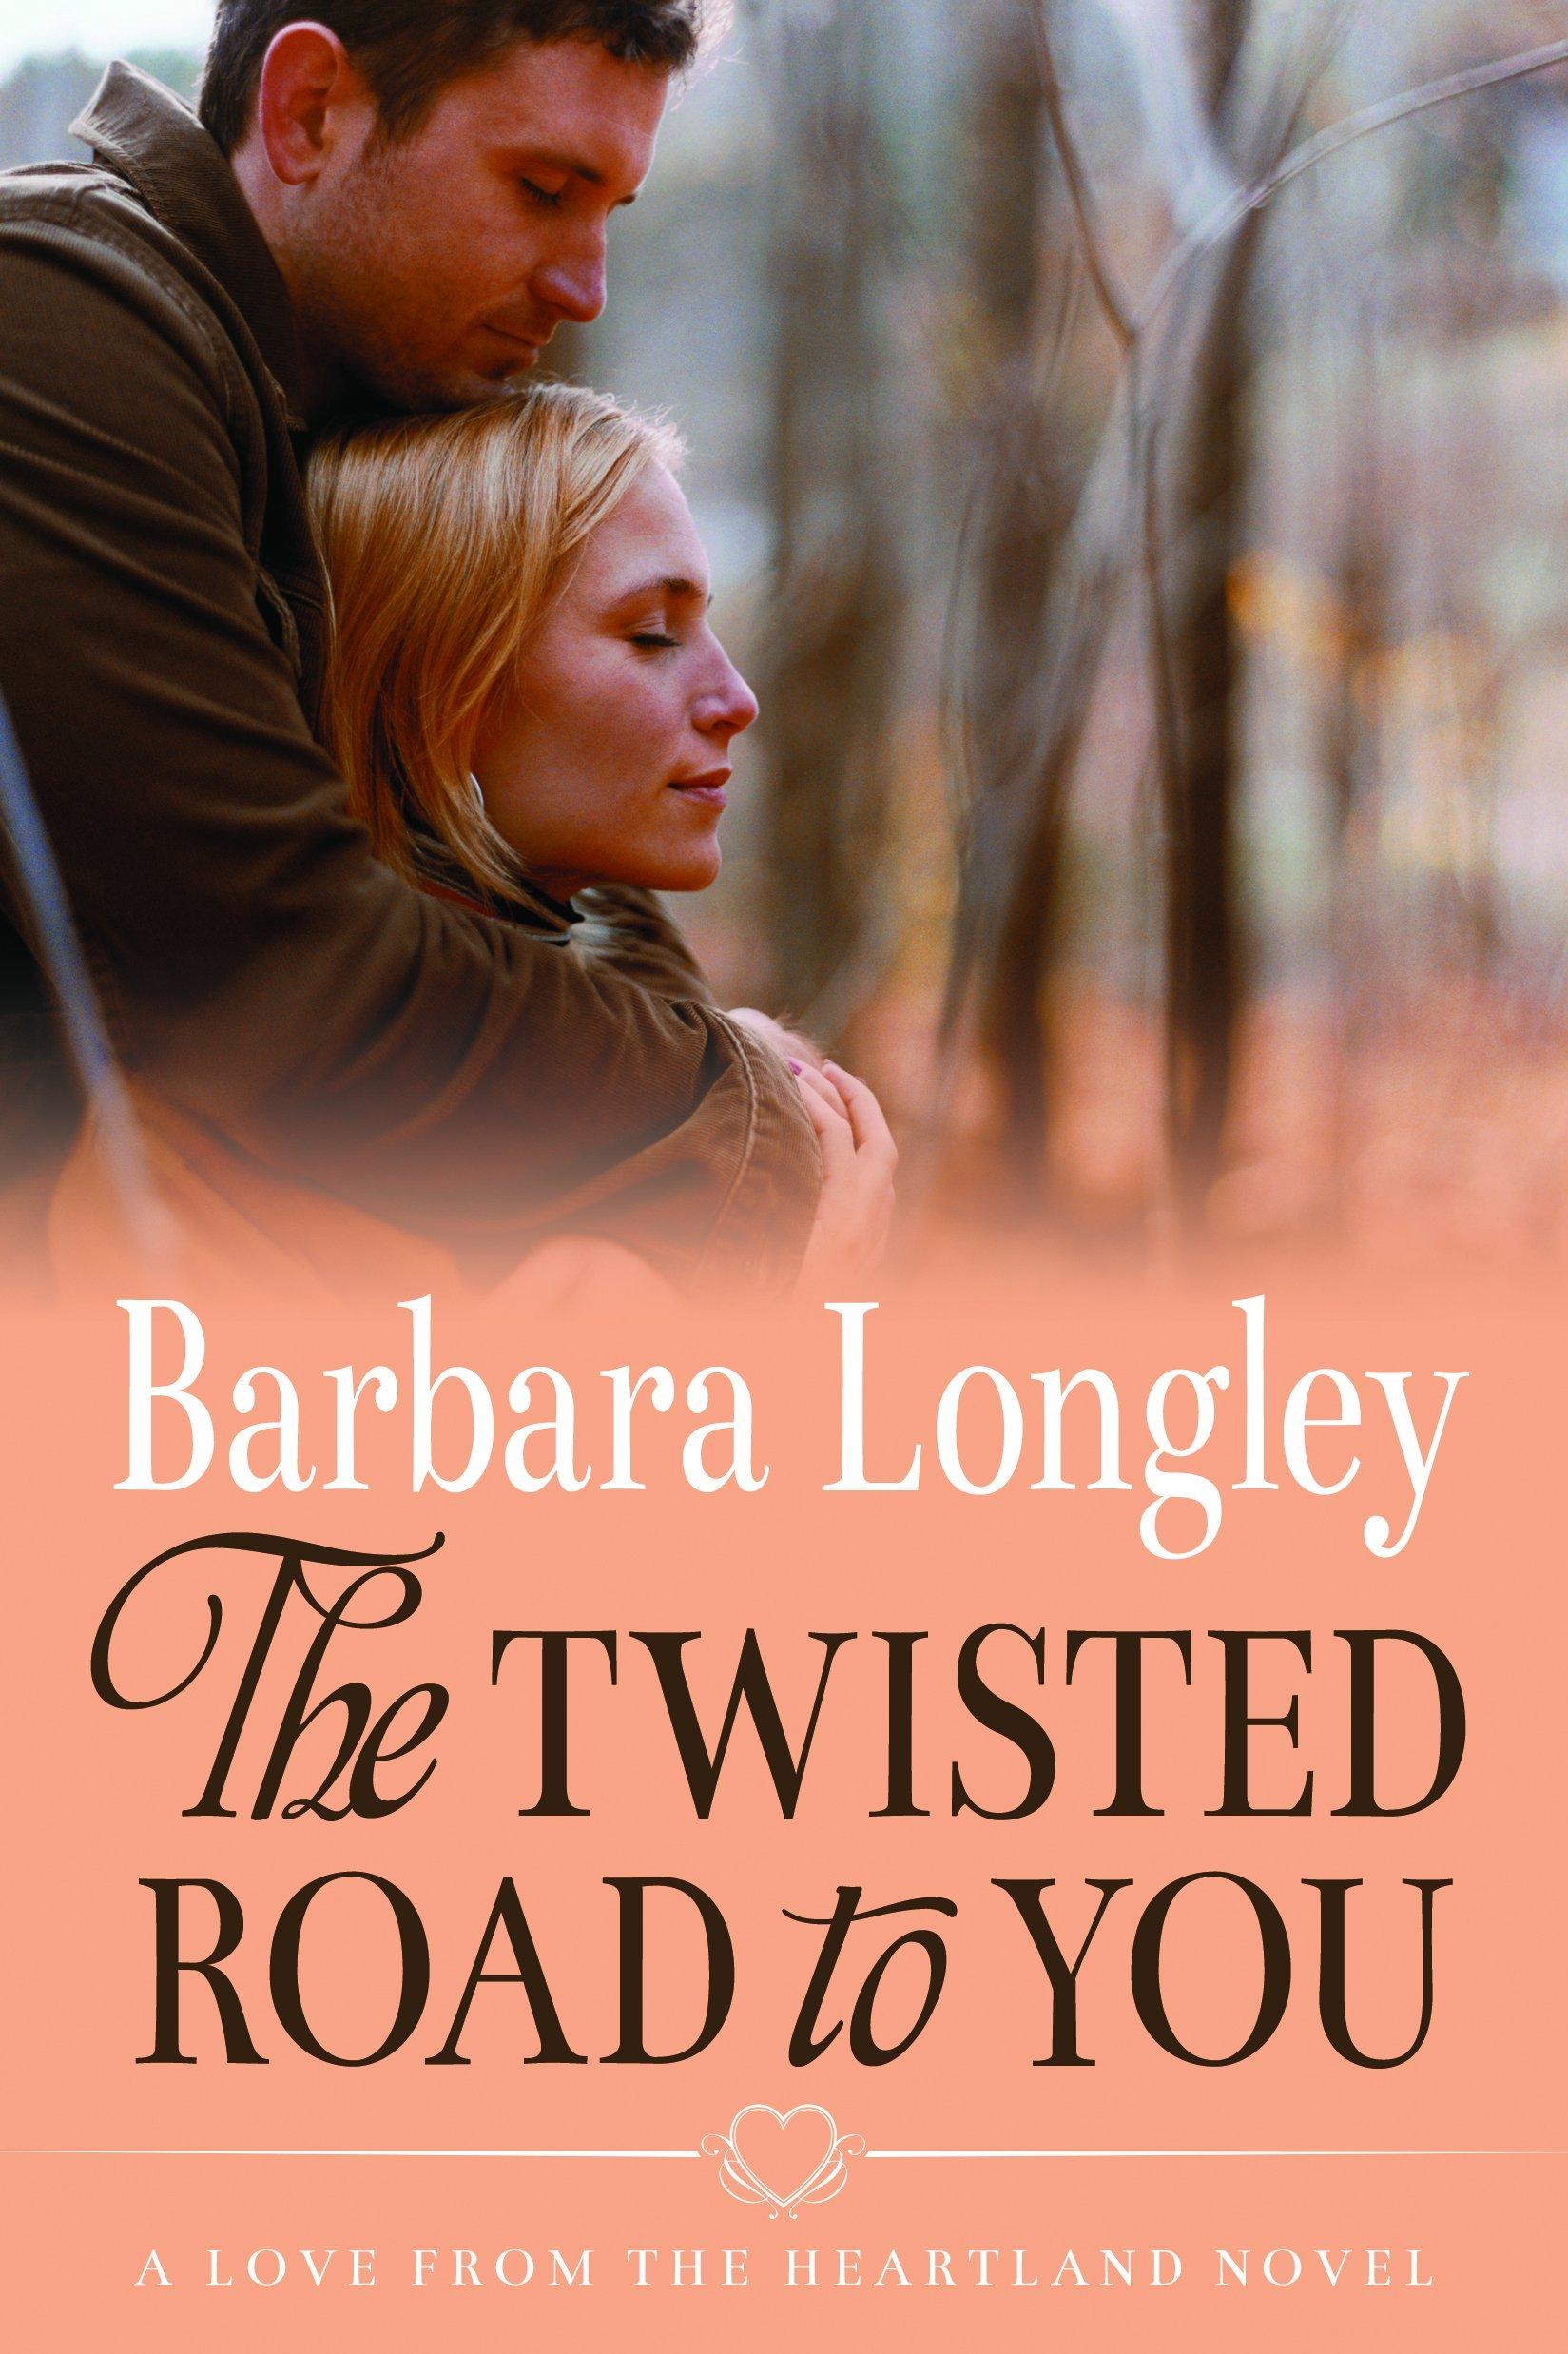 The Twisted Road to You